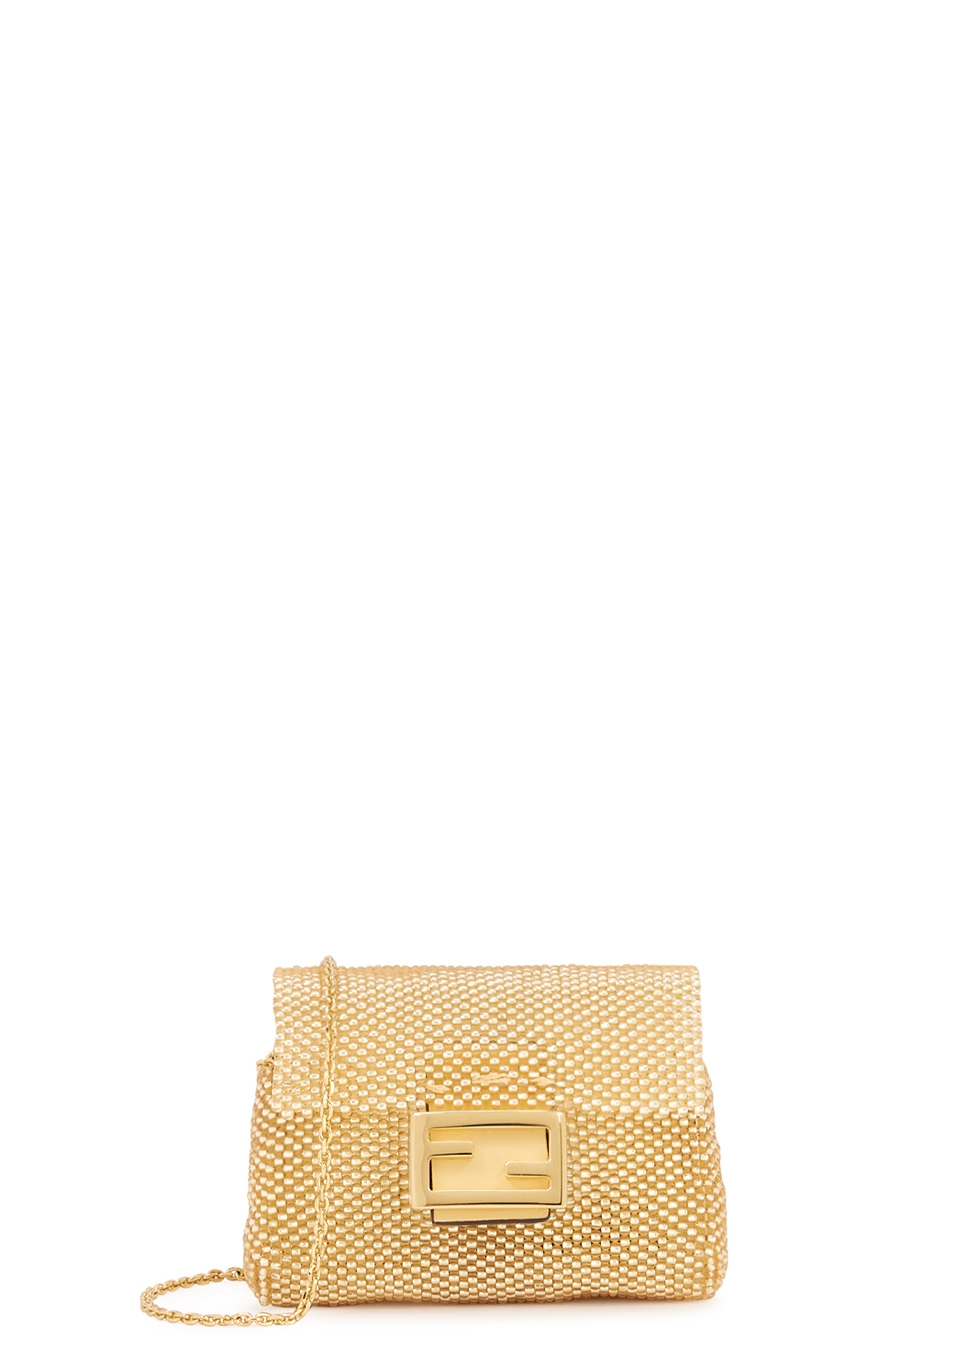 fendi bag with pearls